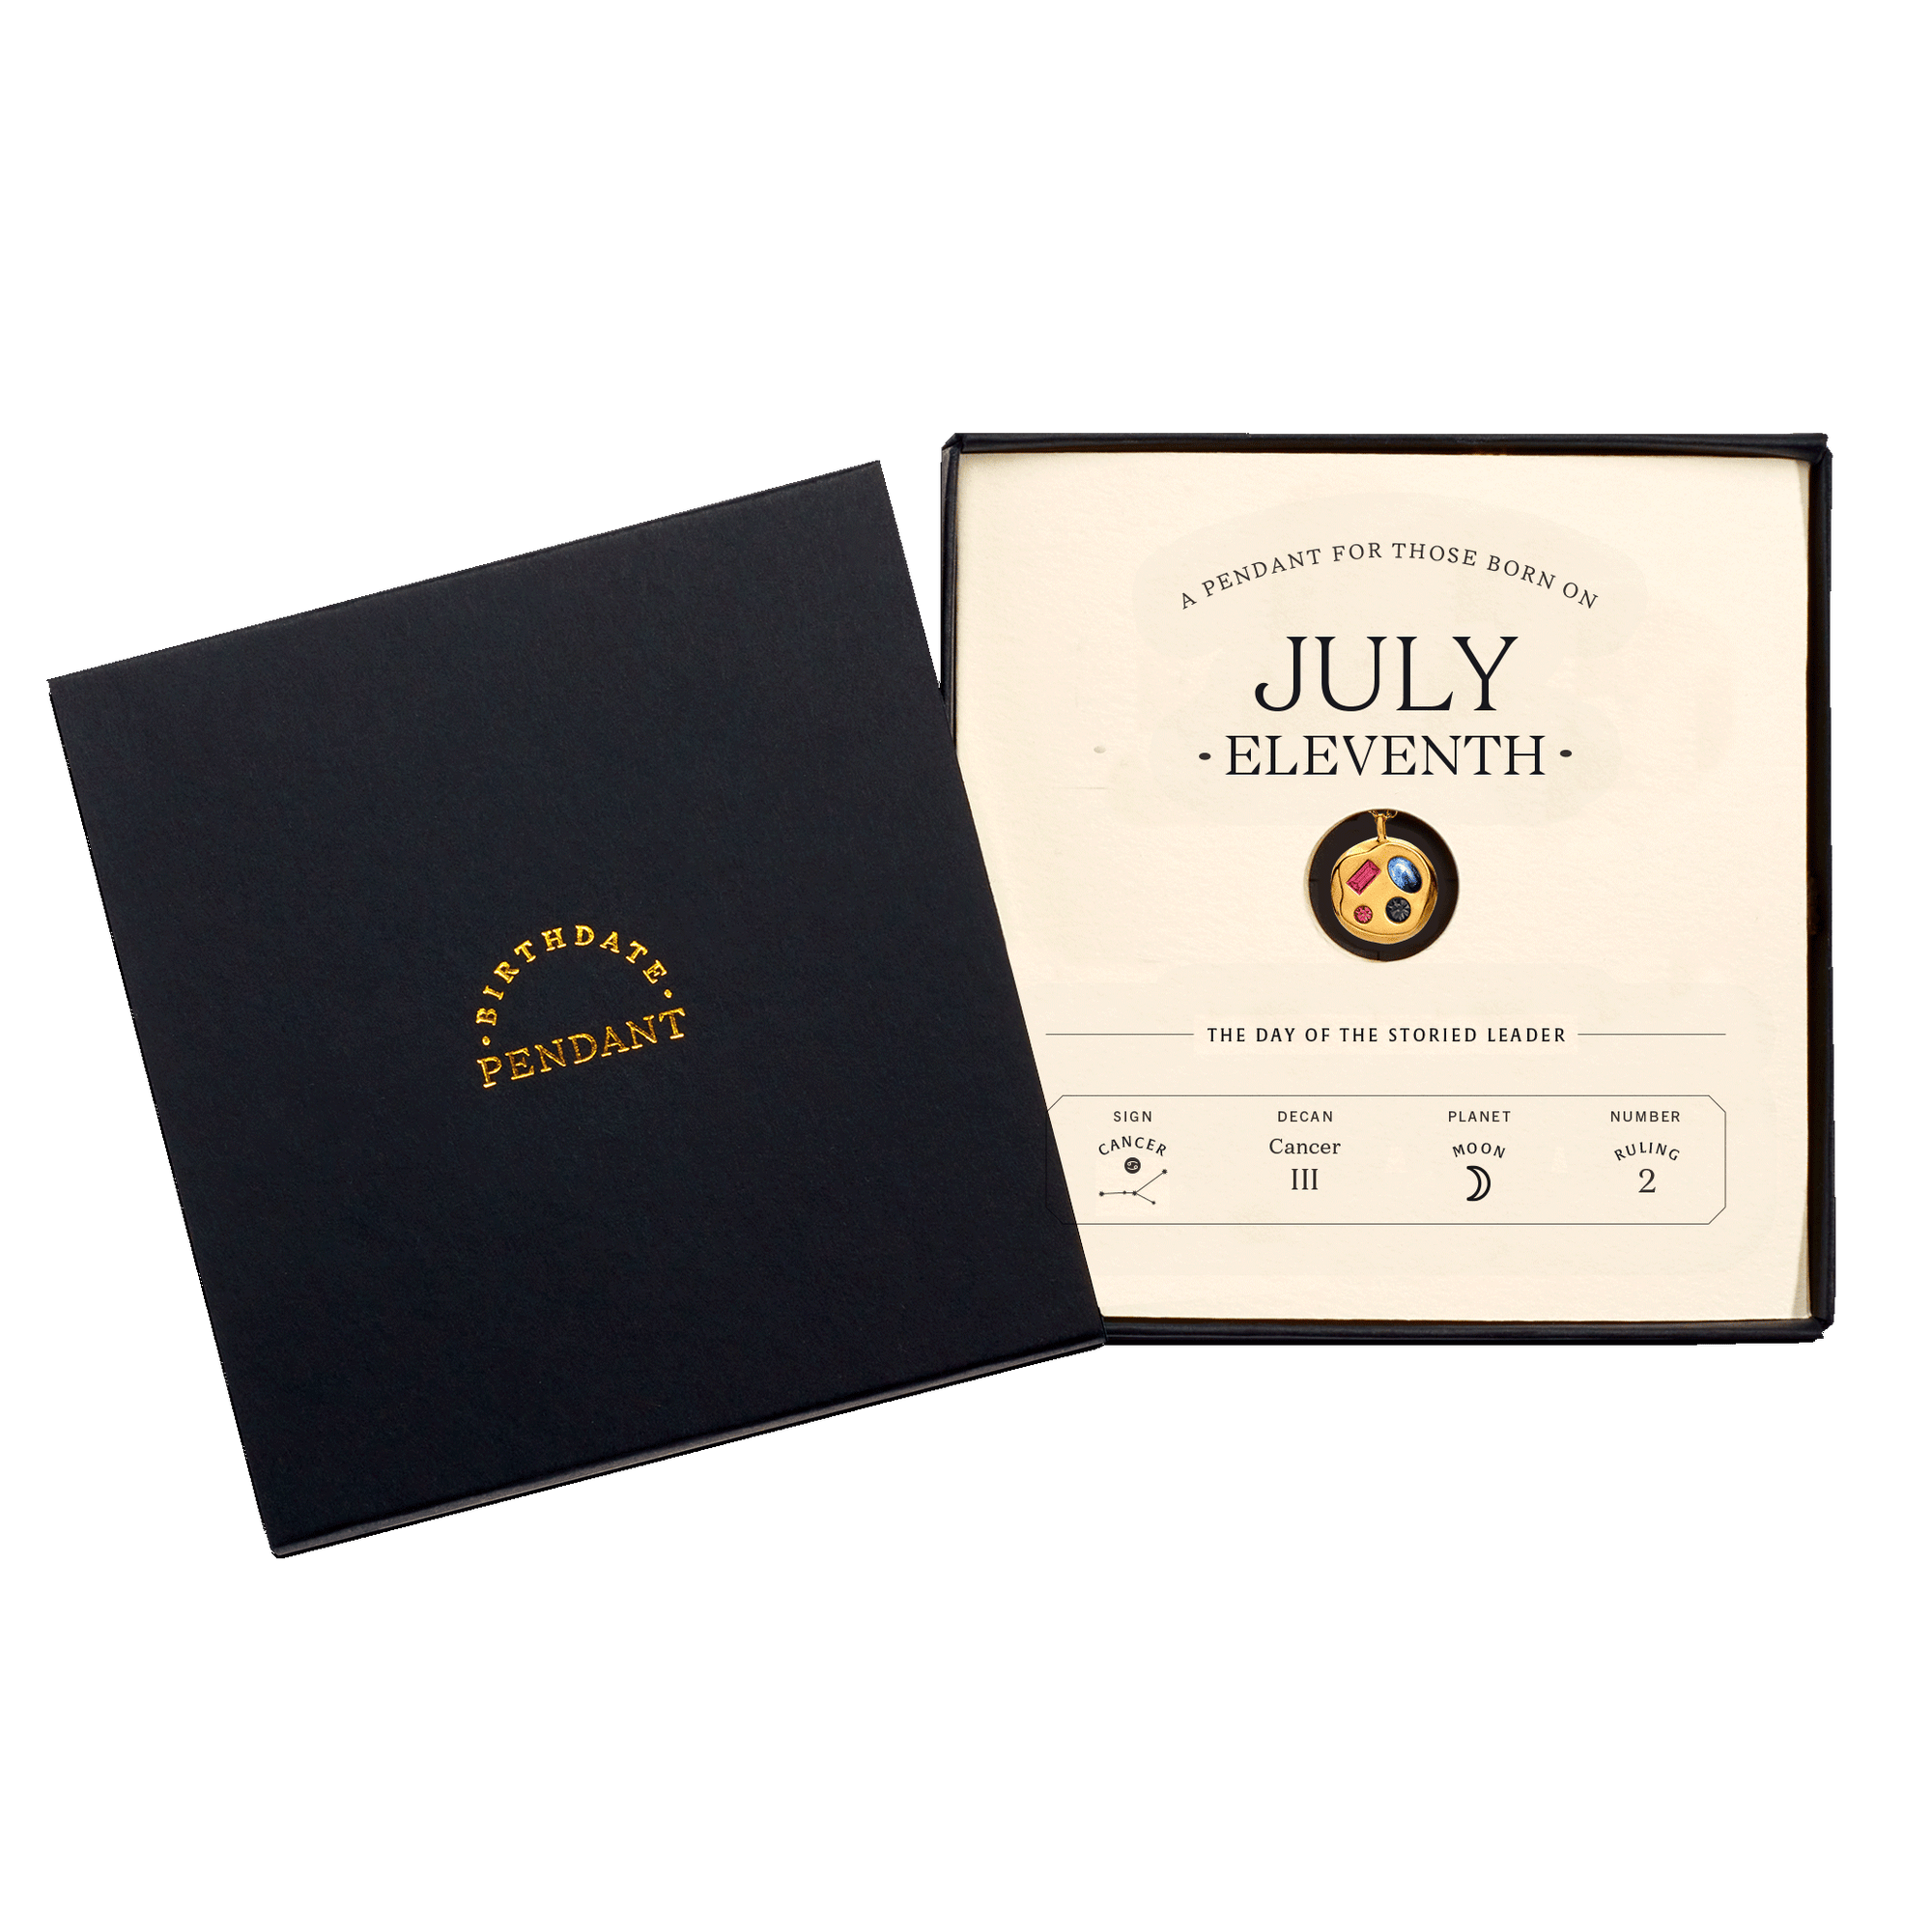 The July Eleventh Pendant inside its box